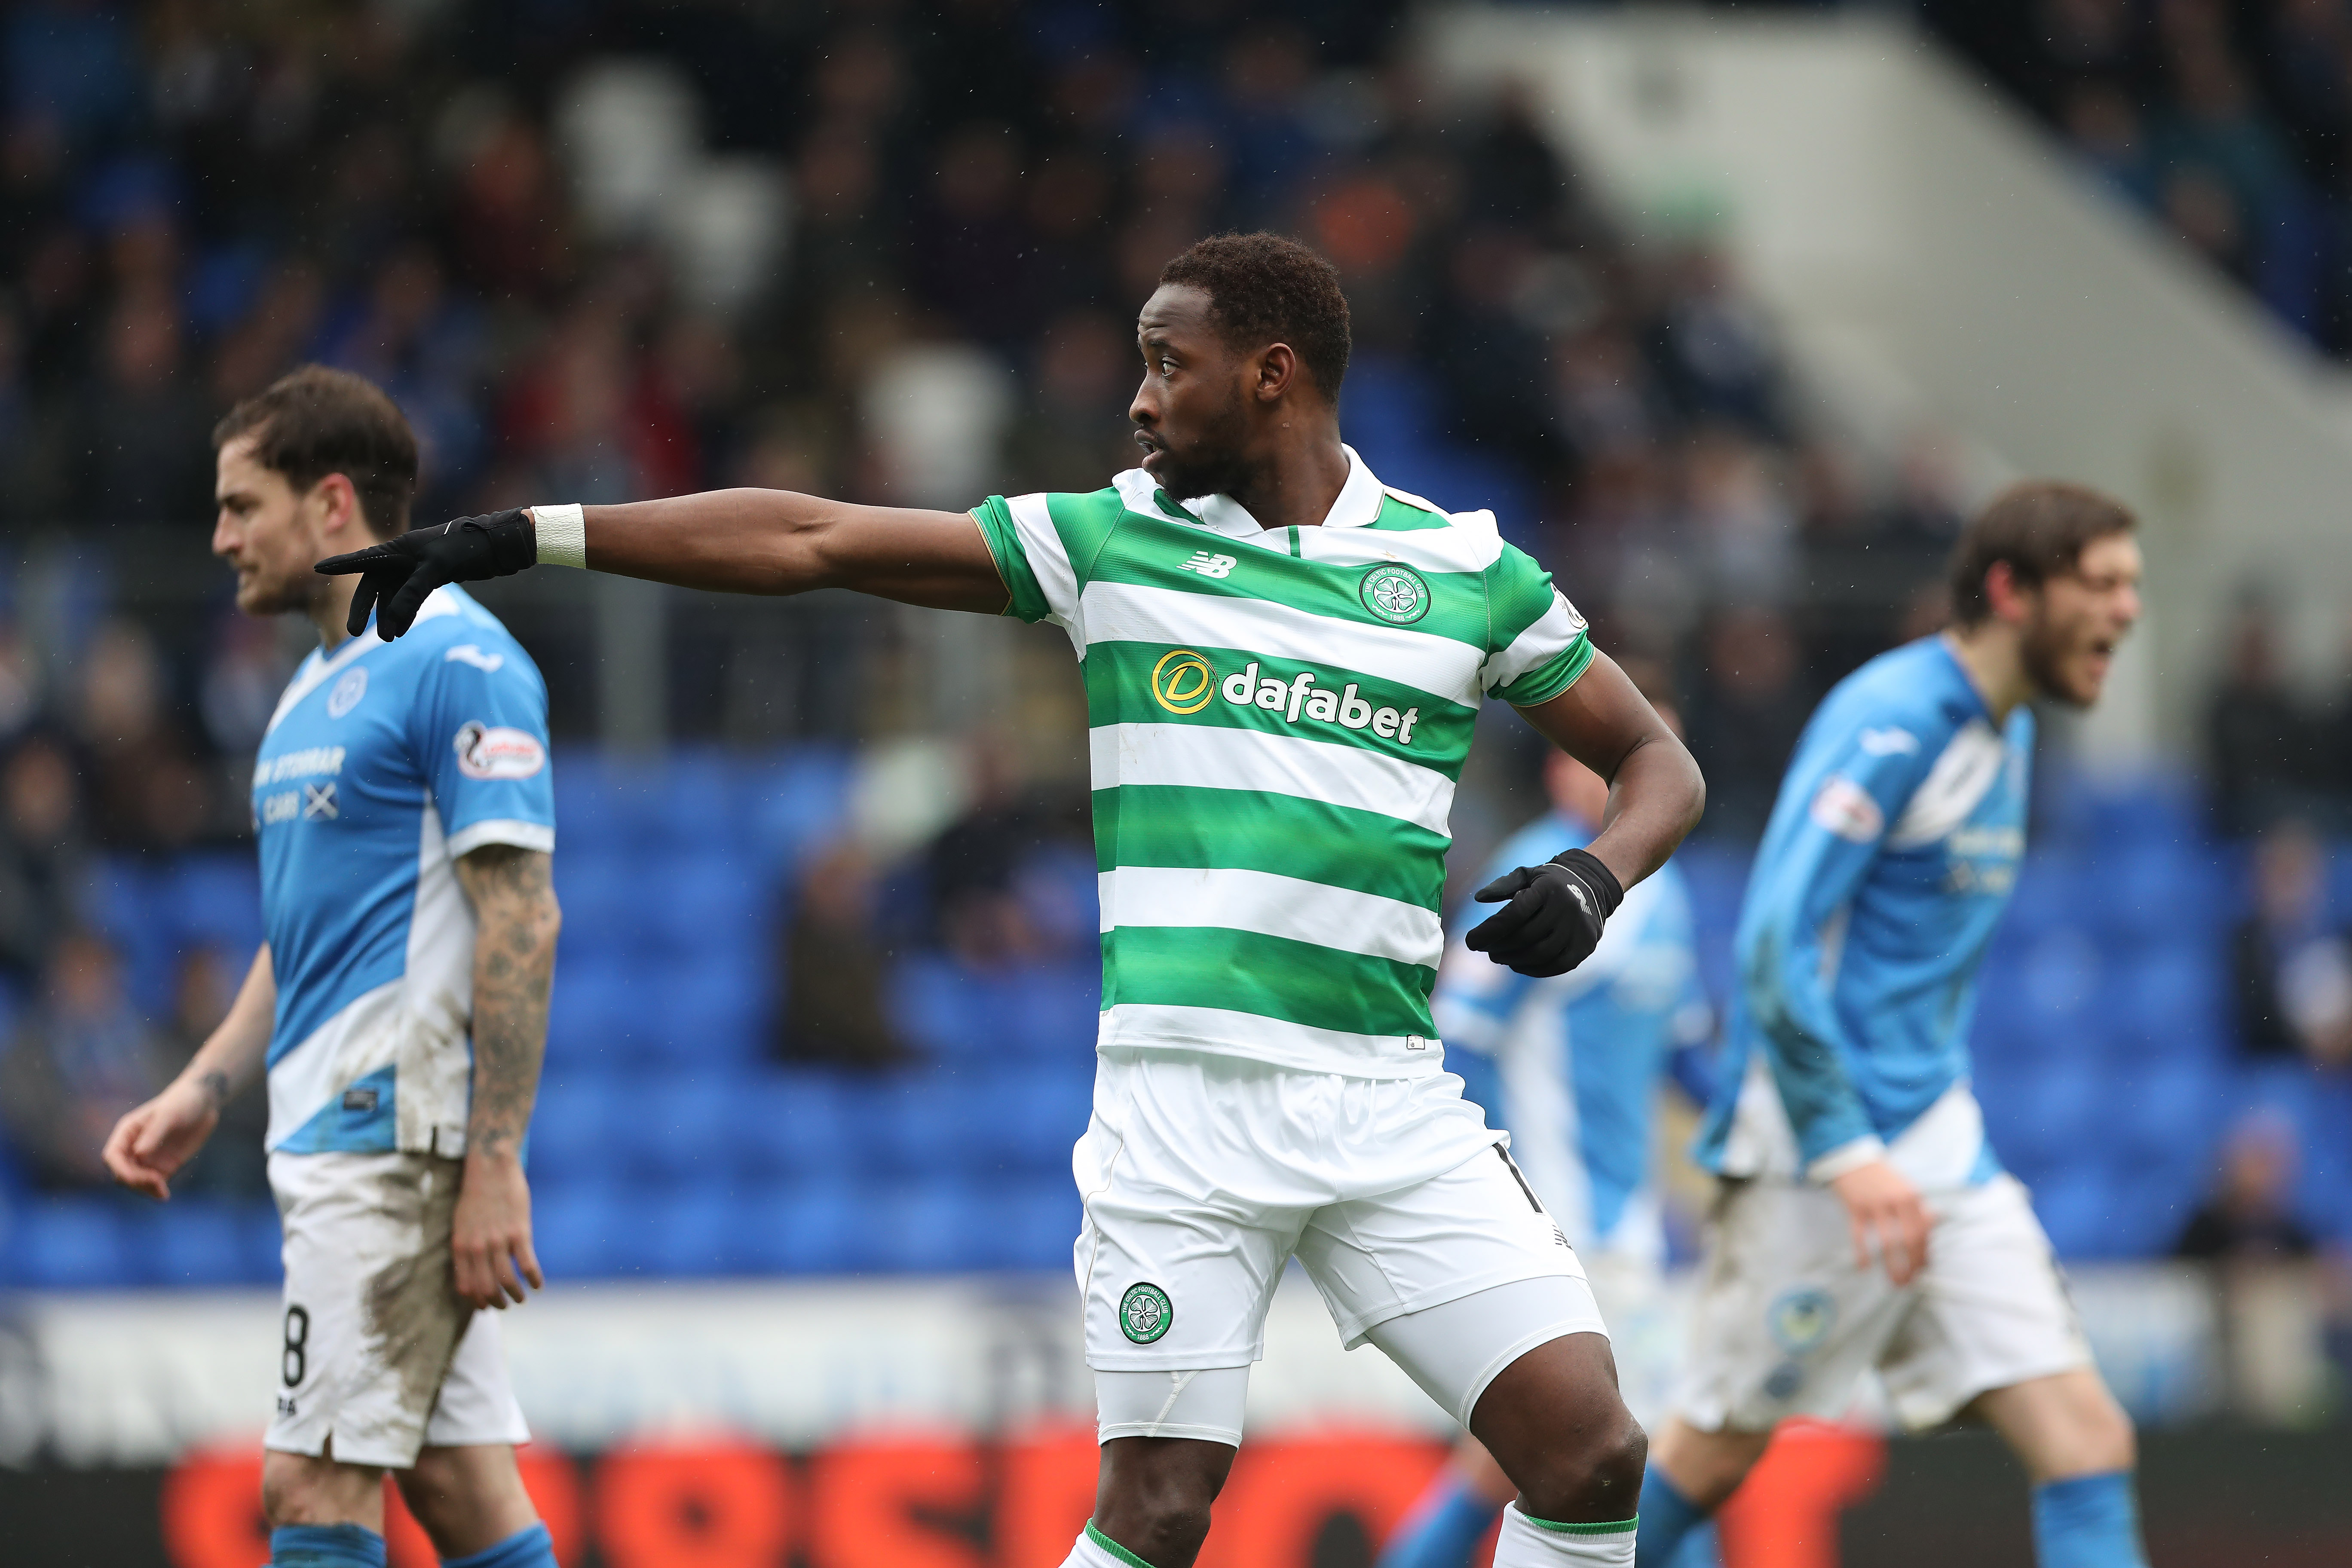 PERTH, SCOTLAND - FEBRUARY 05:  Moussa Dembele of Celtic celebrates after he scores from the penalty spot during the Ladbrokes Scottish Premiership match between St Johnstone and Celtic at McDiarmid Park at  on February 5, 2017 in Perth, Scotland. (Photo by Ian MacNicol/Getty Images)